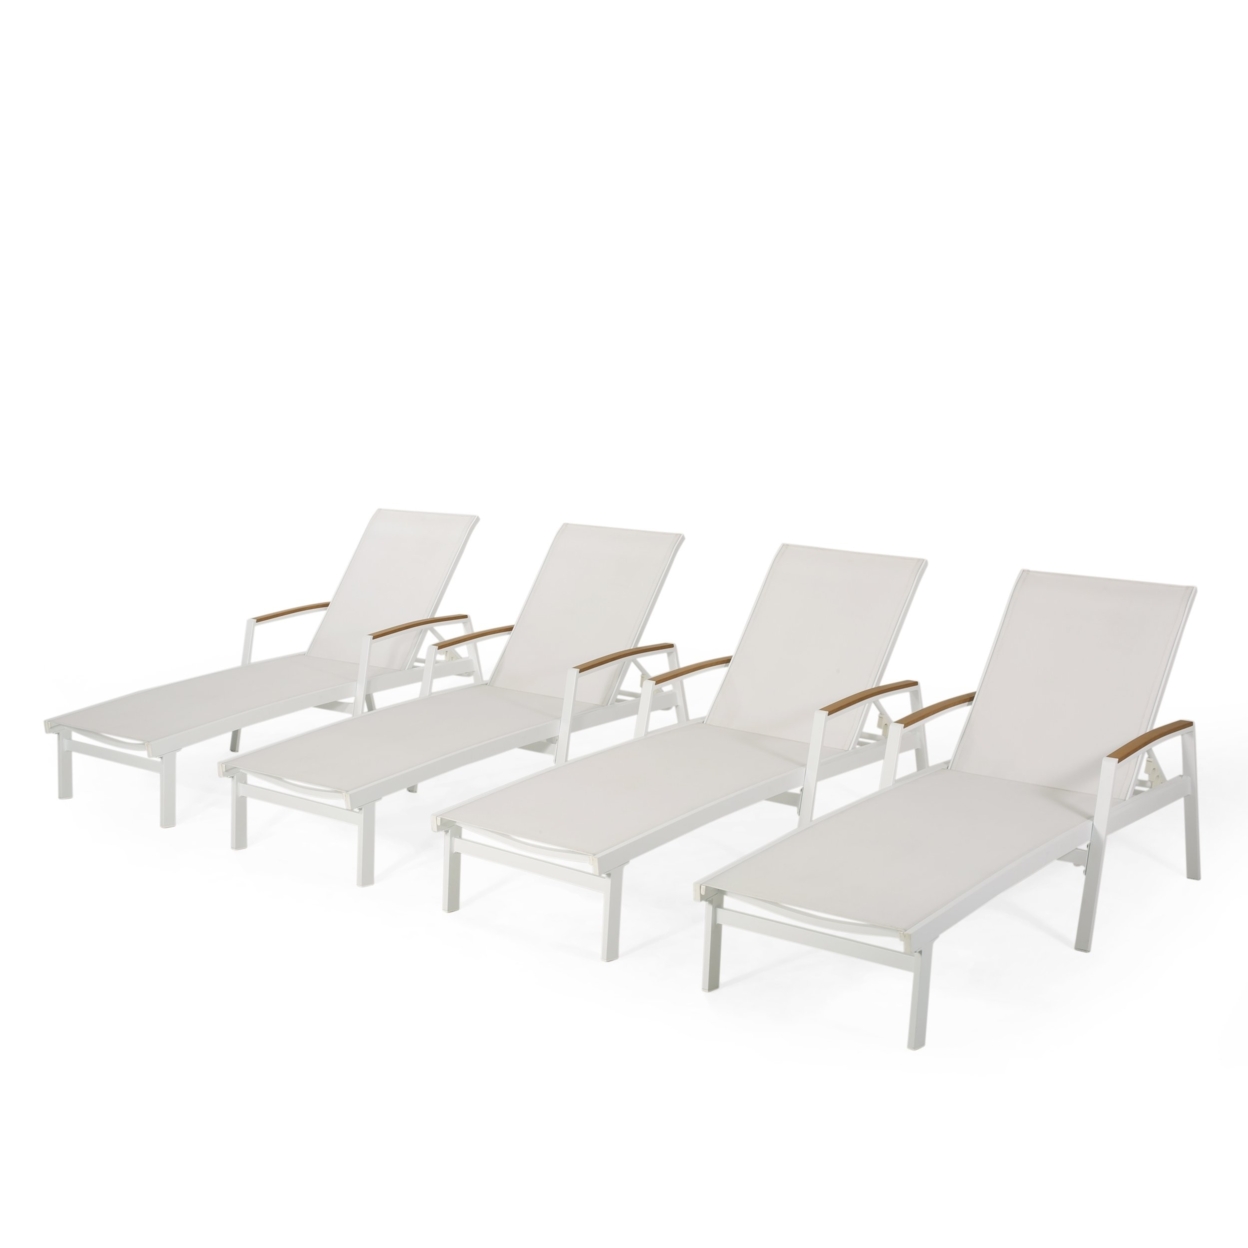 Joy Outdoor Aluminum Chaise Lounge With Mesh Seating (Set Of 4) - White